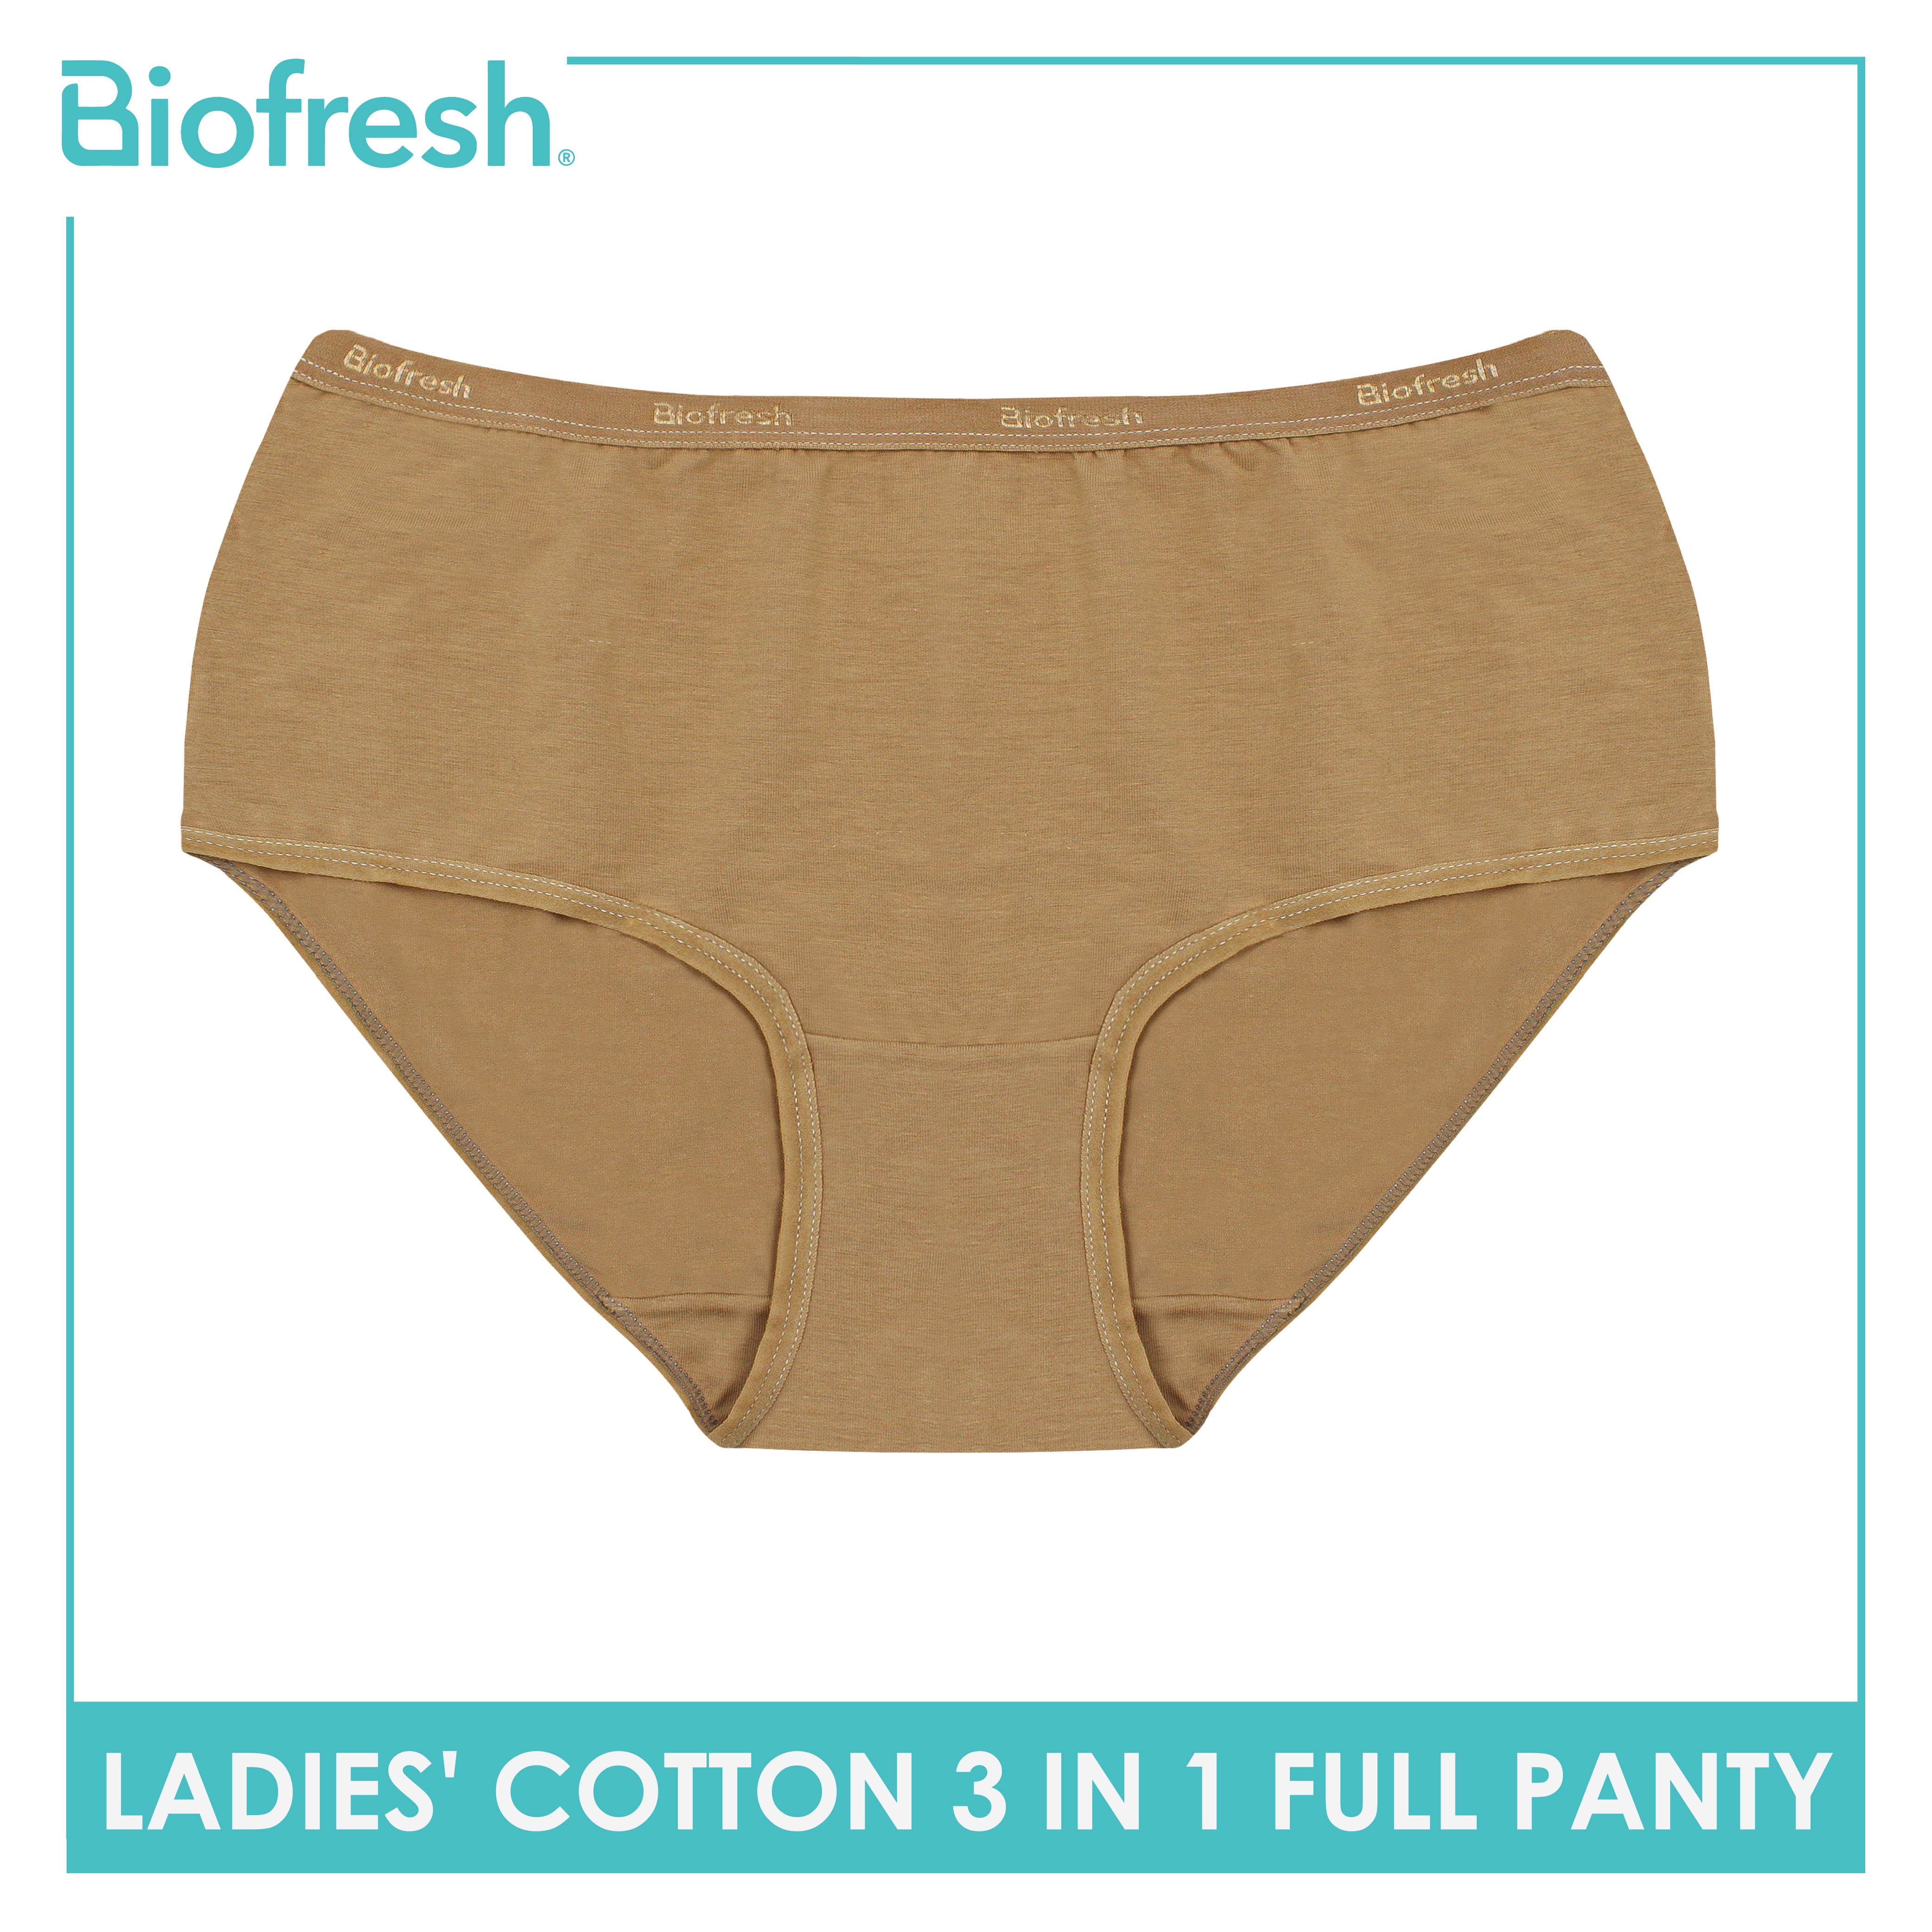 Biofresh Ladies' Antimicrobial Cotton Full Panty 3 pieces in a pack ULPRG3  – burlingtonph